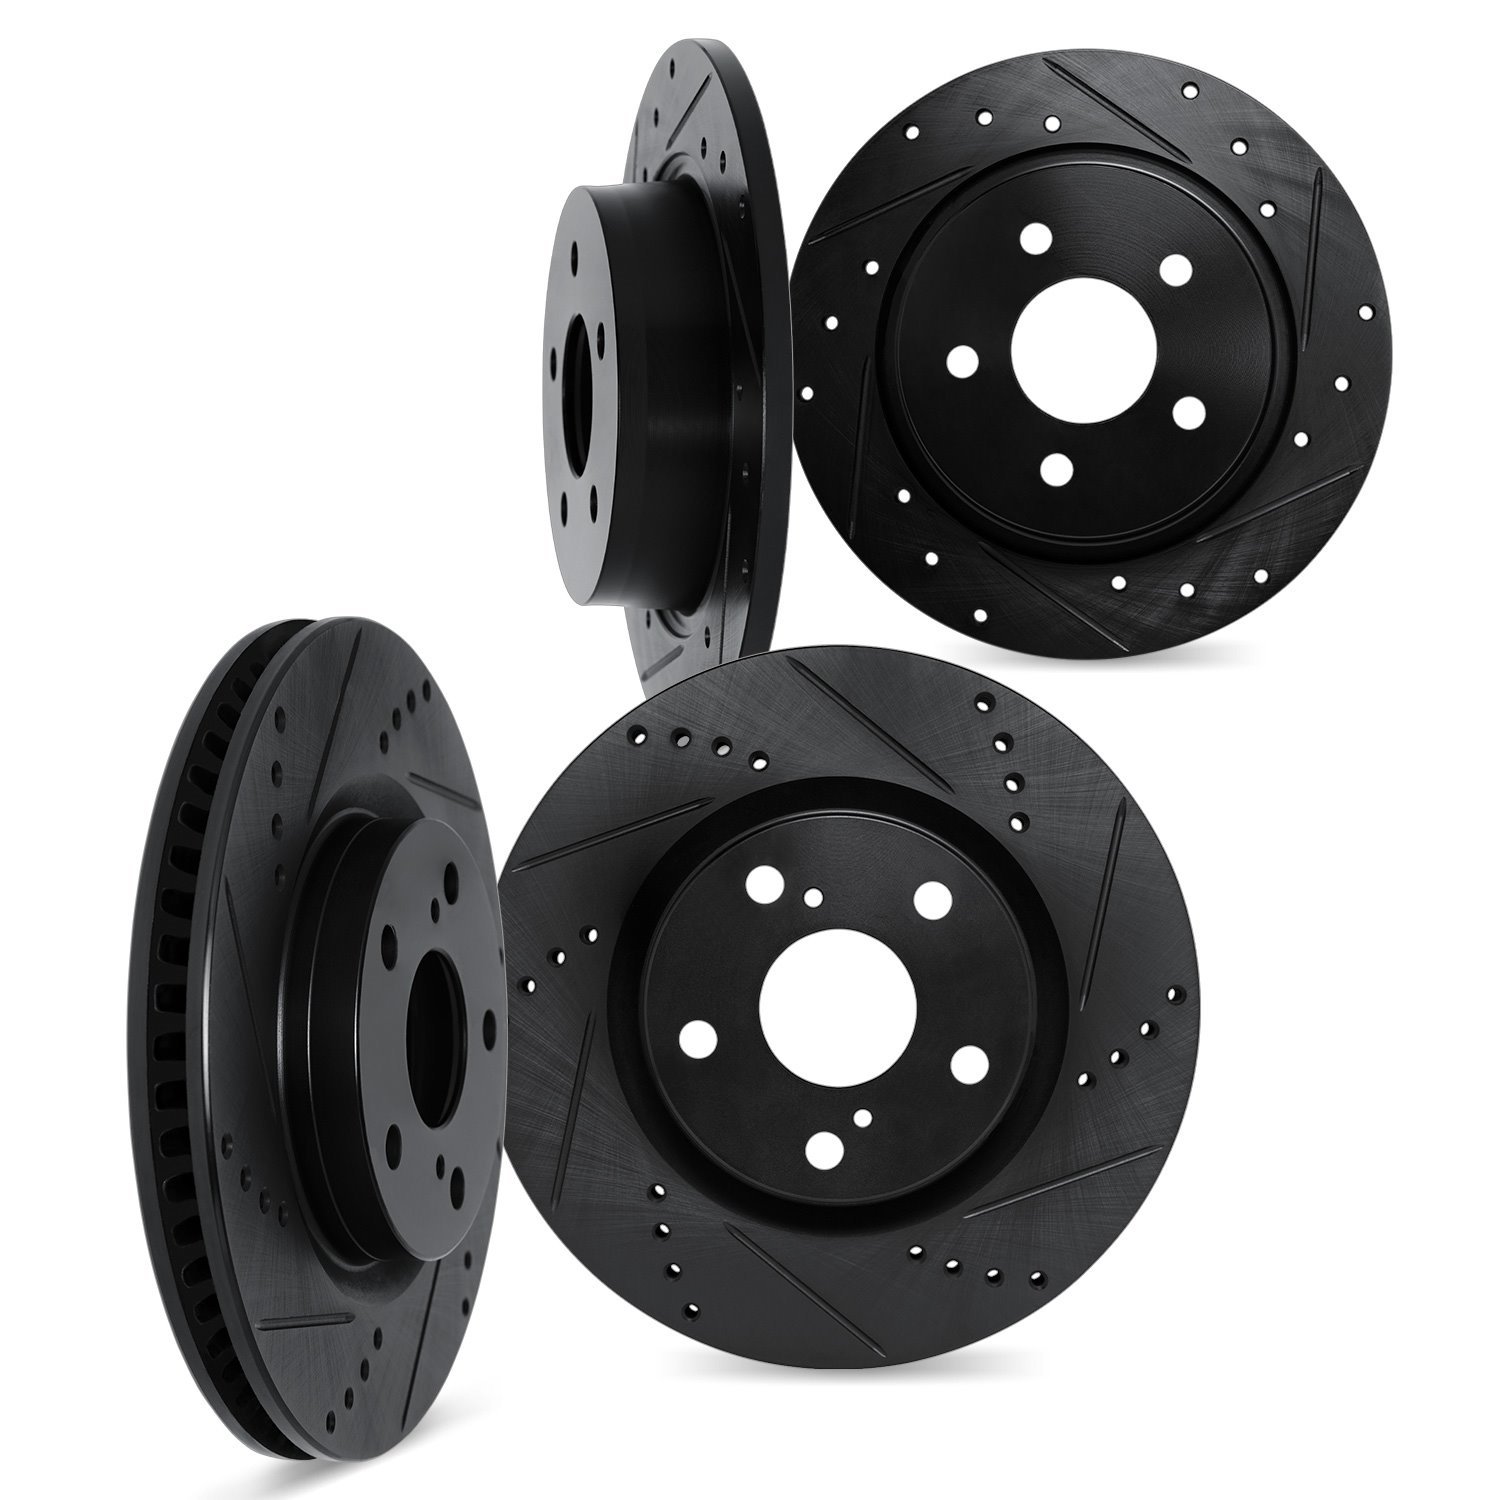 8004-73035 Drilled/Slotted Brake Rotors [Black], 1998-2001 Audi/Volkswagen, Position: Front and Rear